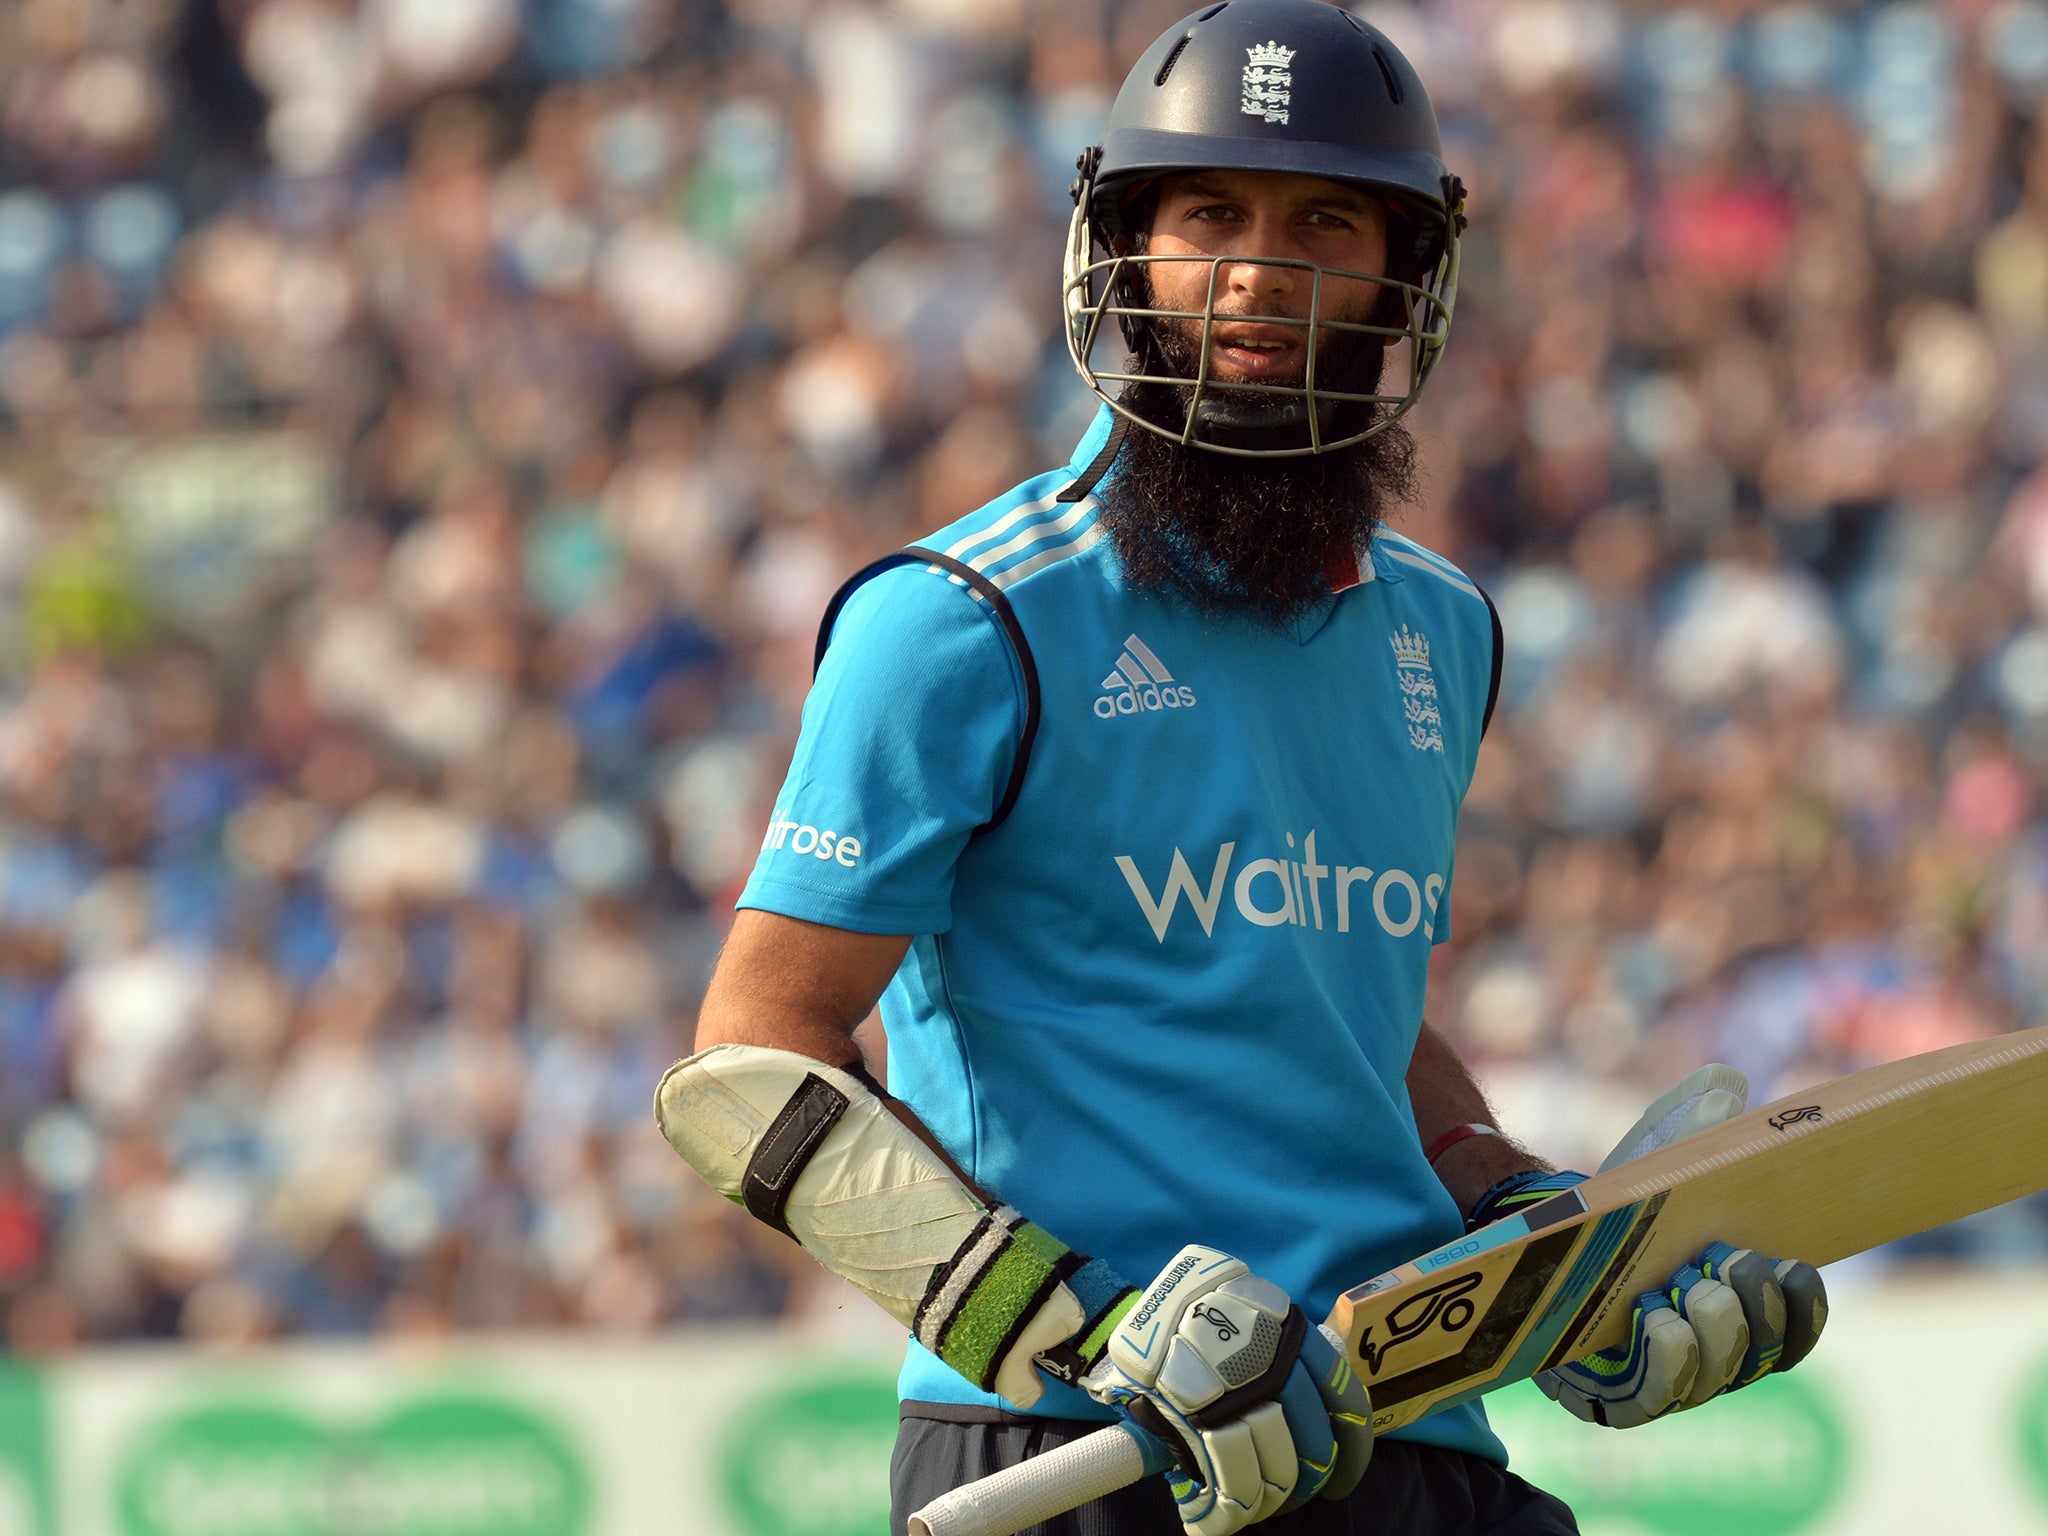 Moeen Ali in action for England